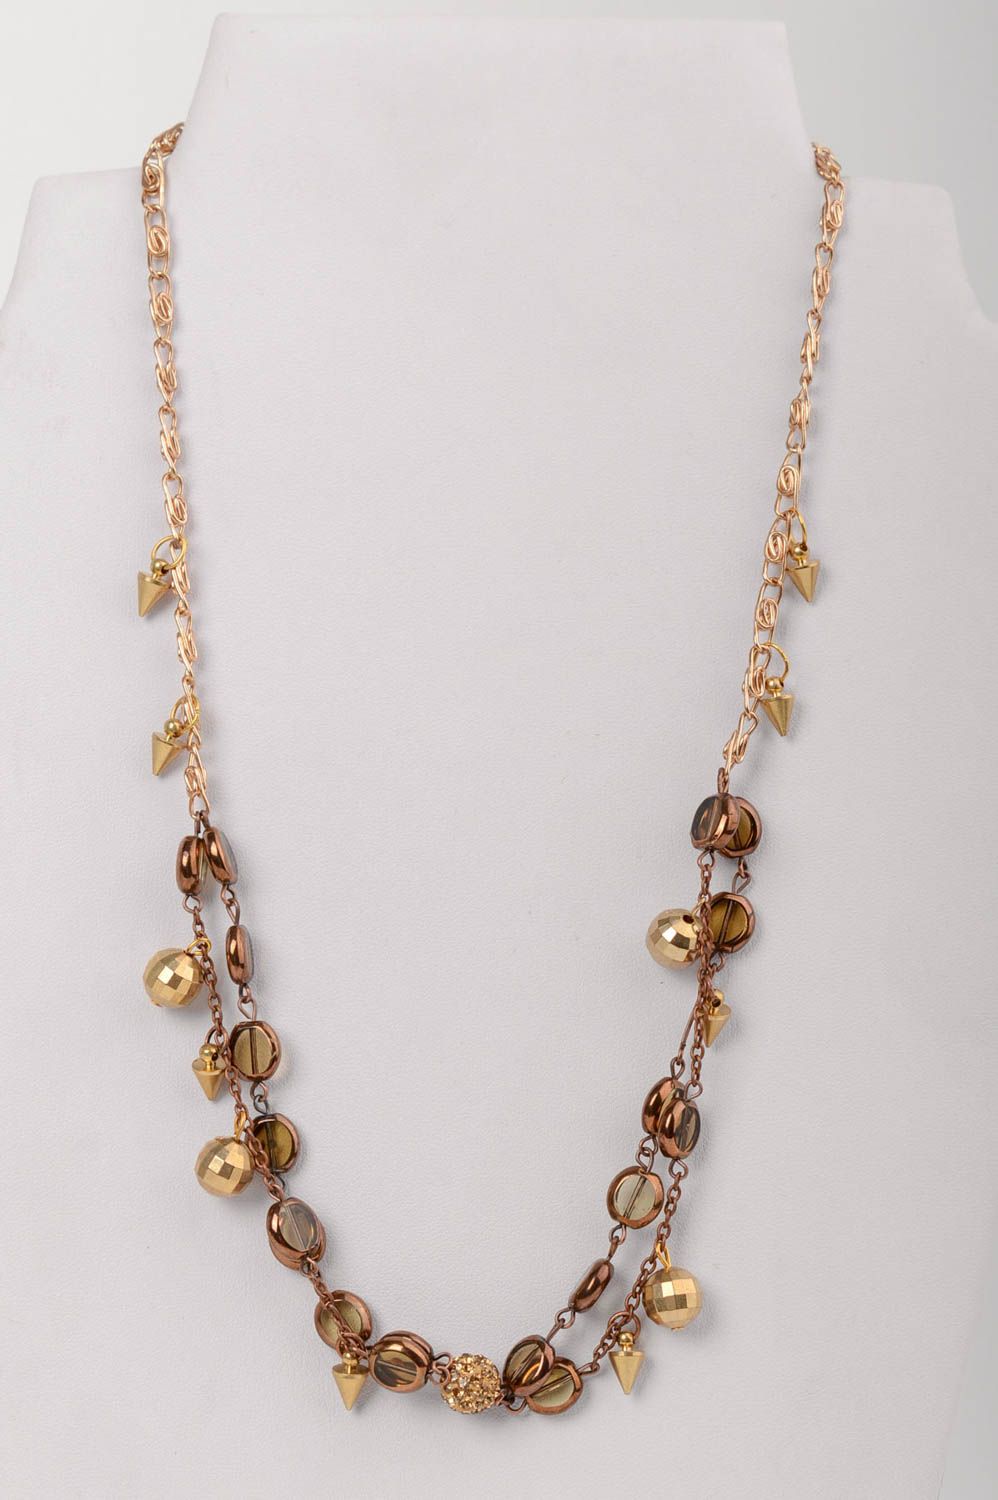 Handmade long elegant golden colored necklace with glass beads on metal chain photo 1